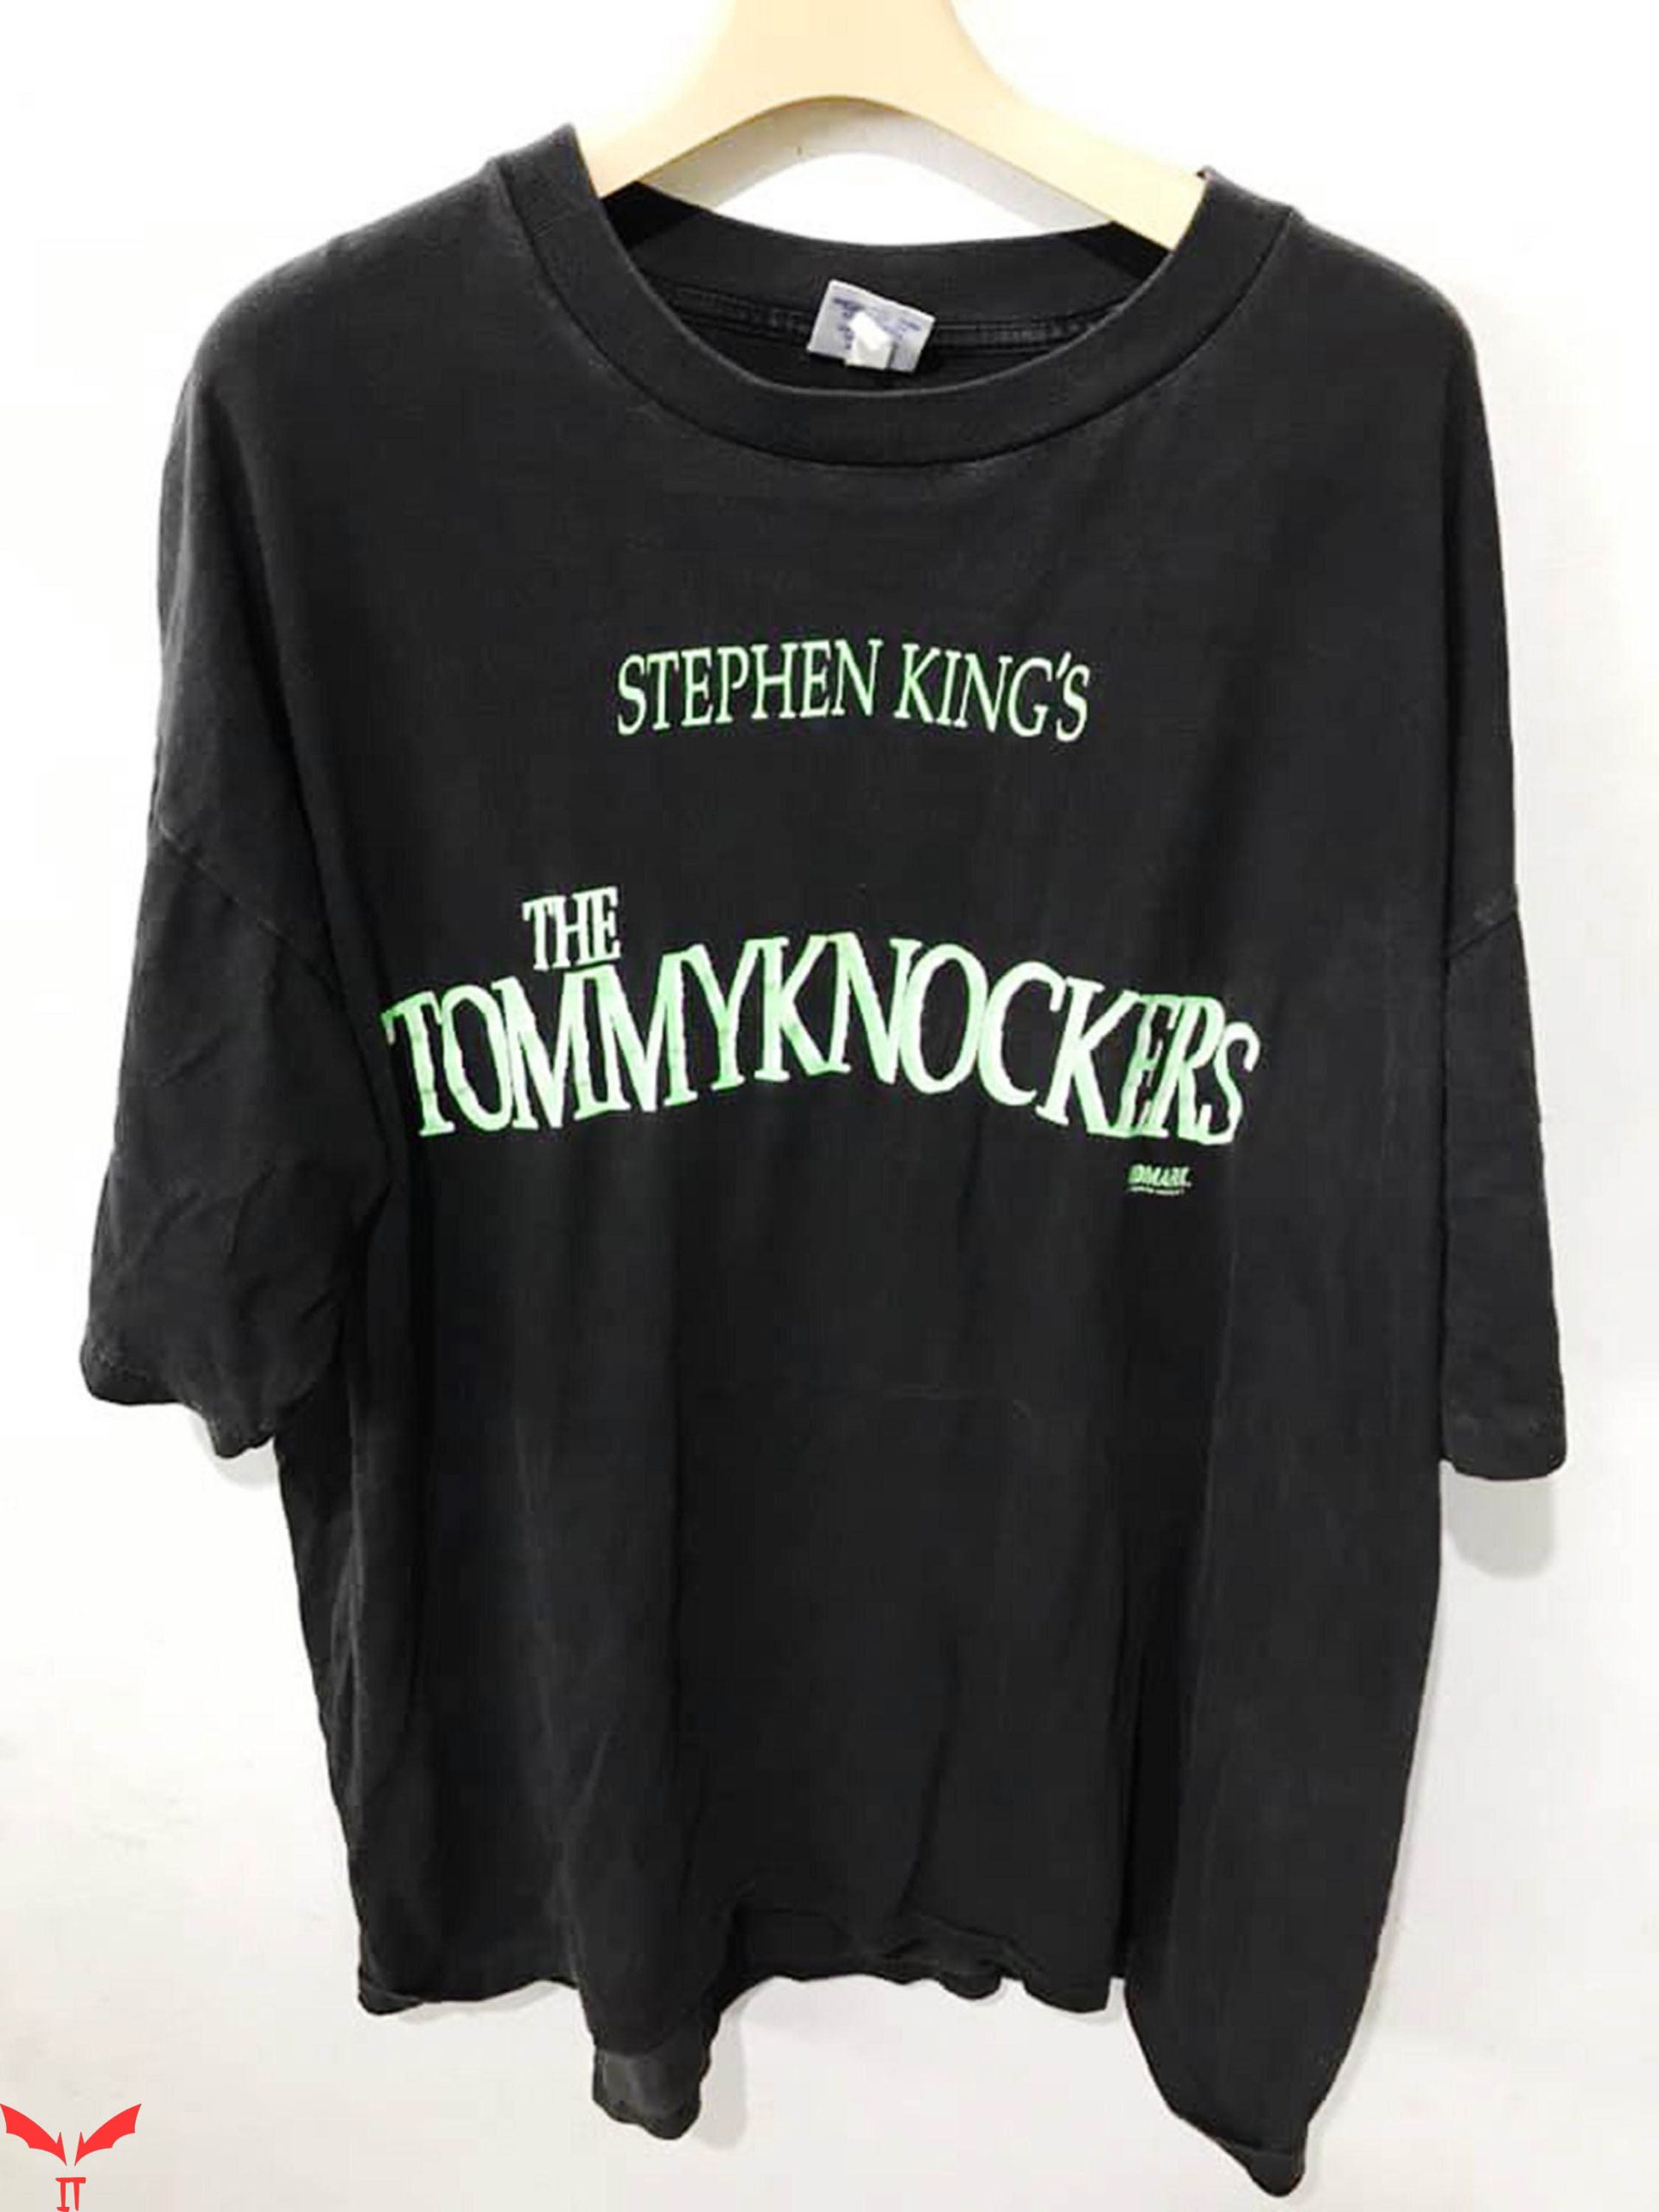 Stephen King IT T-Shirt Vintage The Tommyknockers Horror Movie